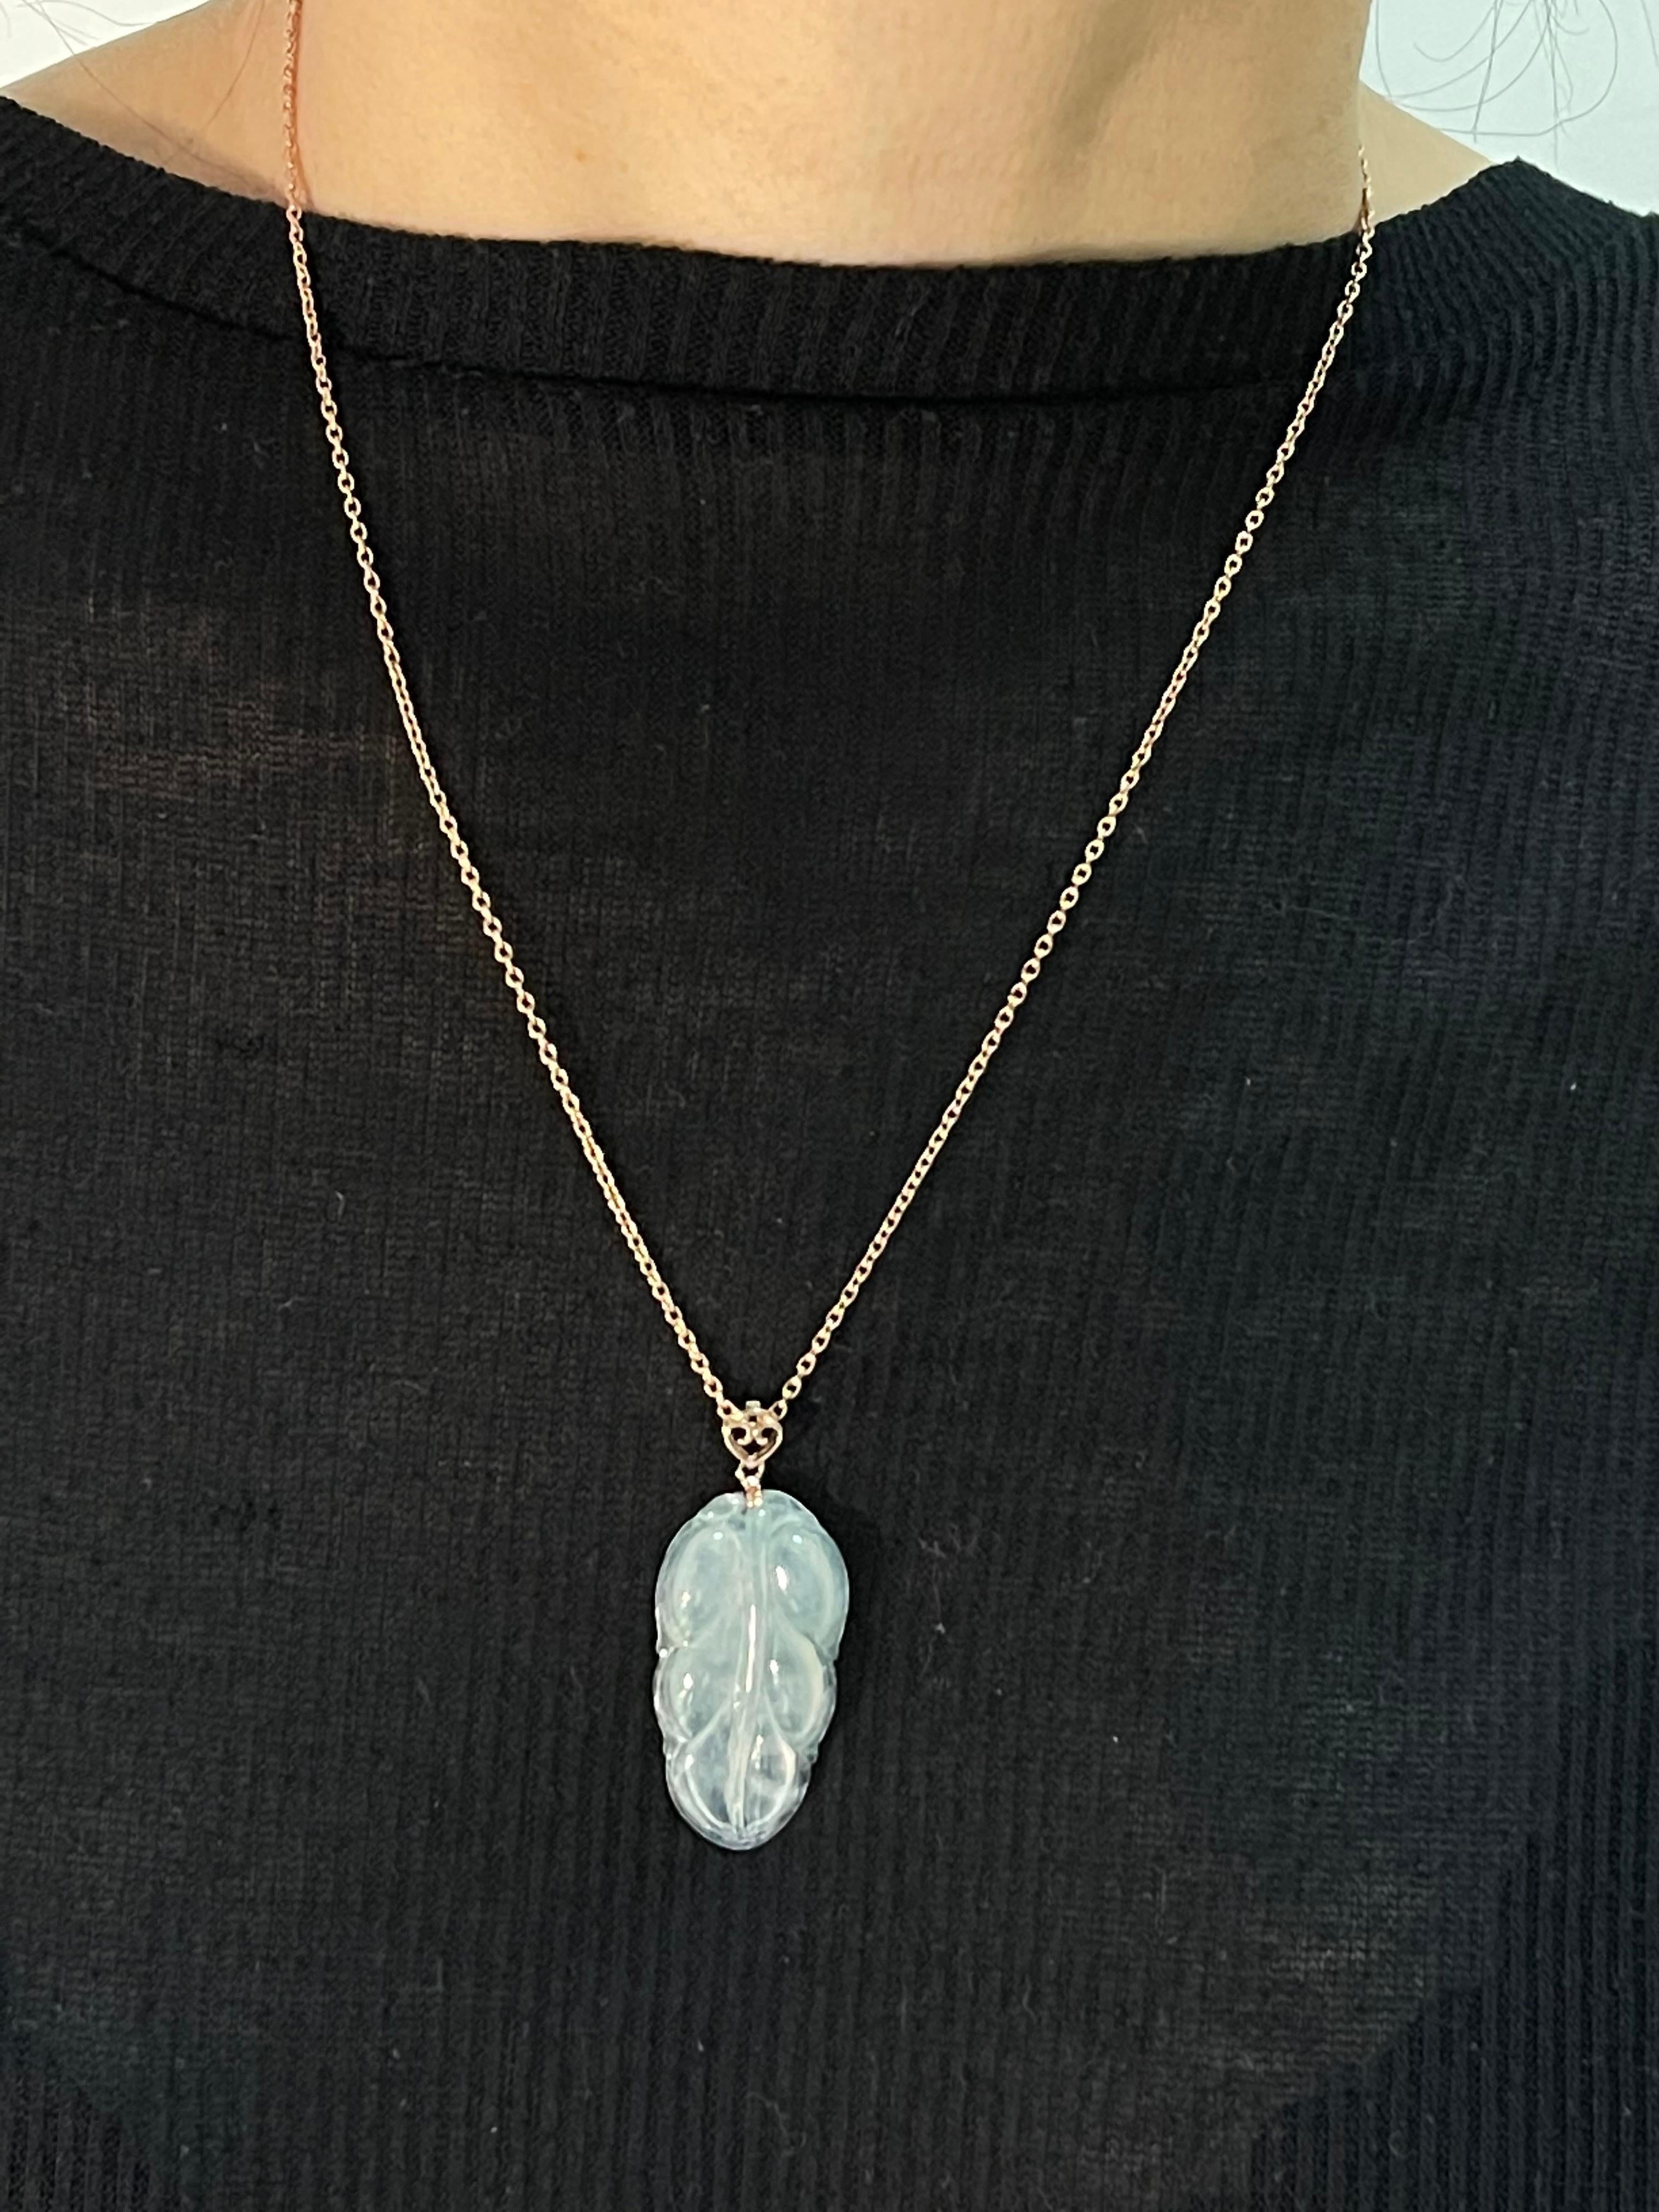 Please check out the HD video! This pendant is certified by two labs to be natural jadeite jade. The pendant is set in 18k rose gold. Clean and colorless jades are well liked. The meaning behind the jade leaf carving is that the wearer will receive